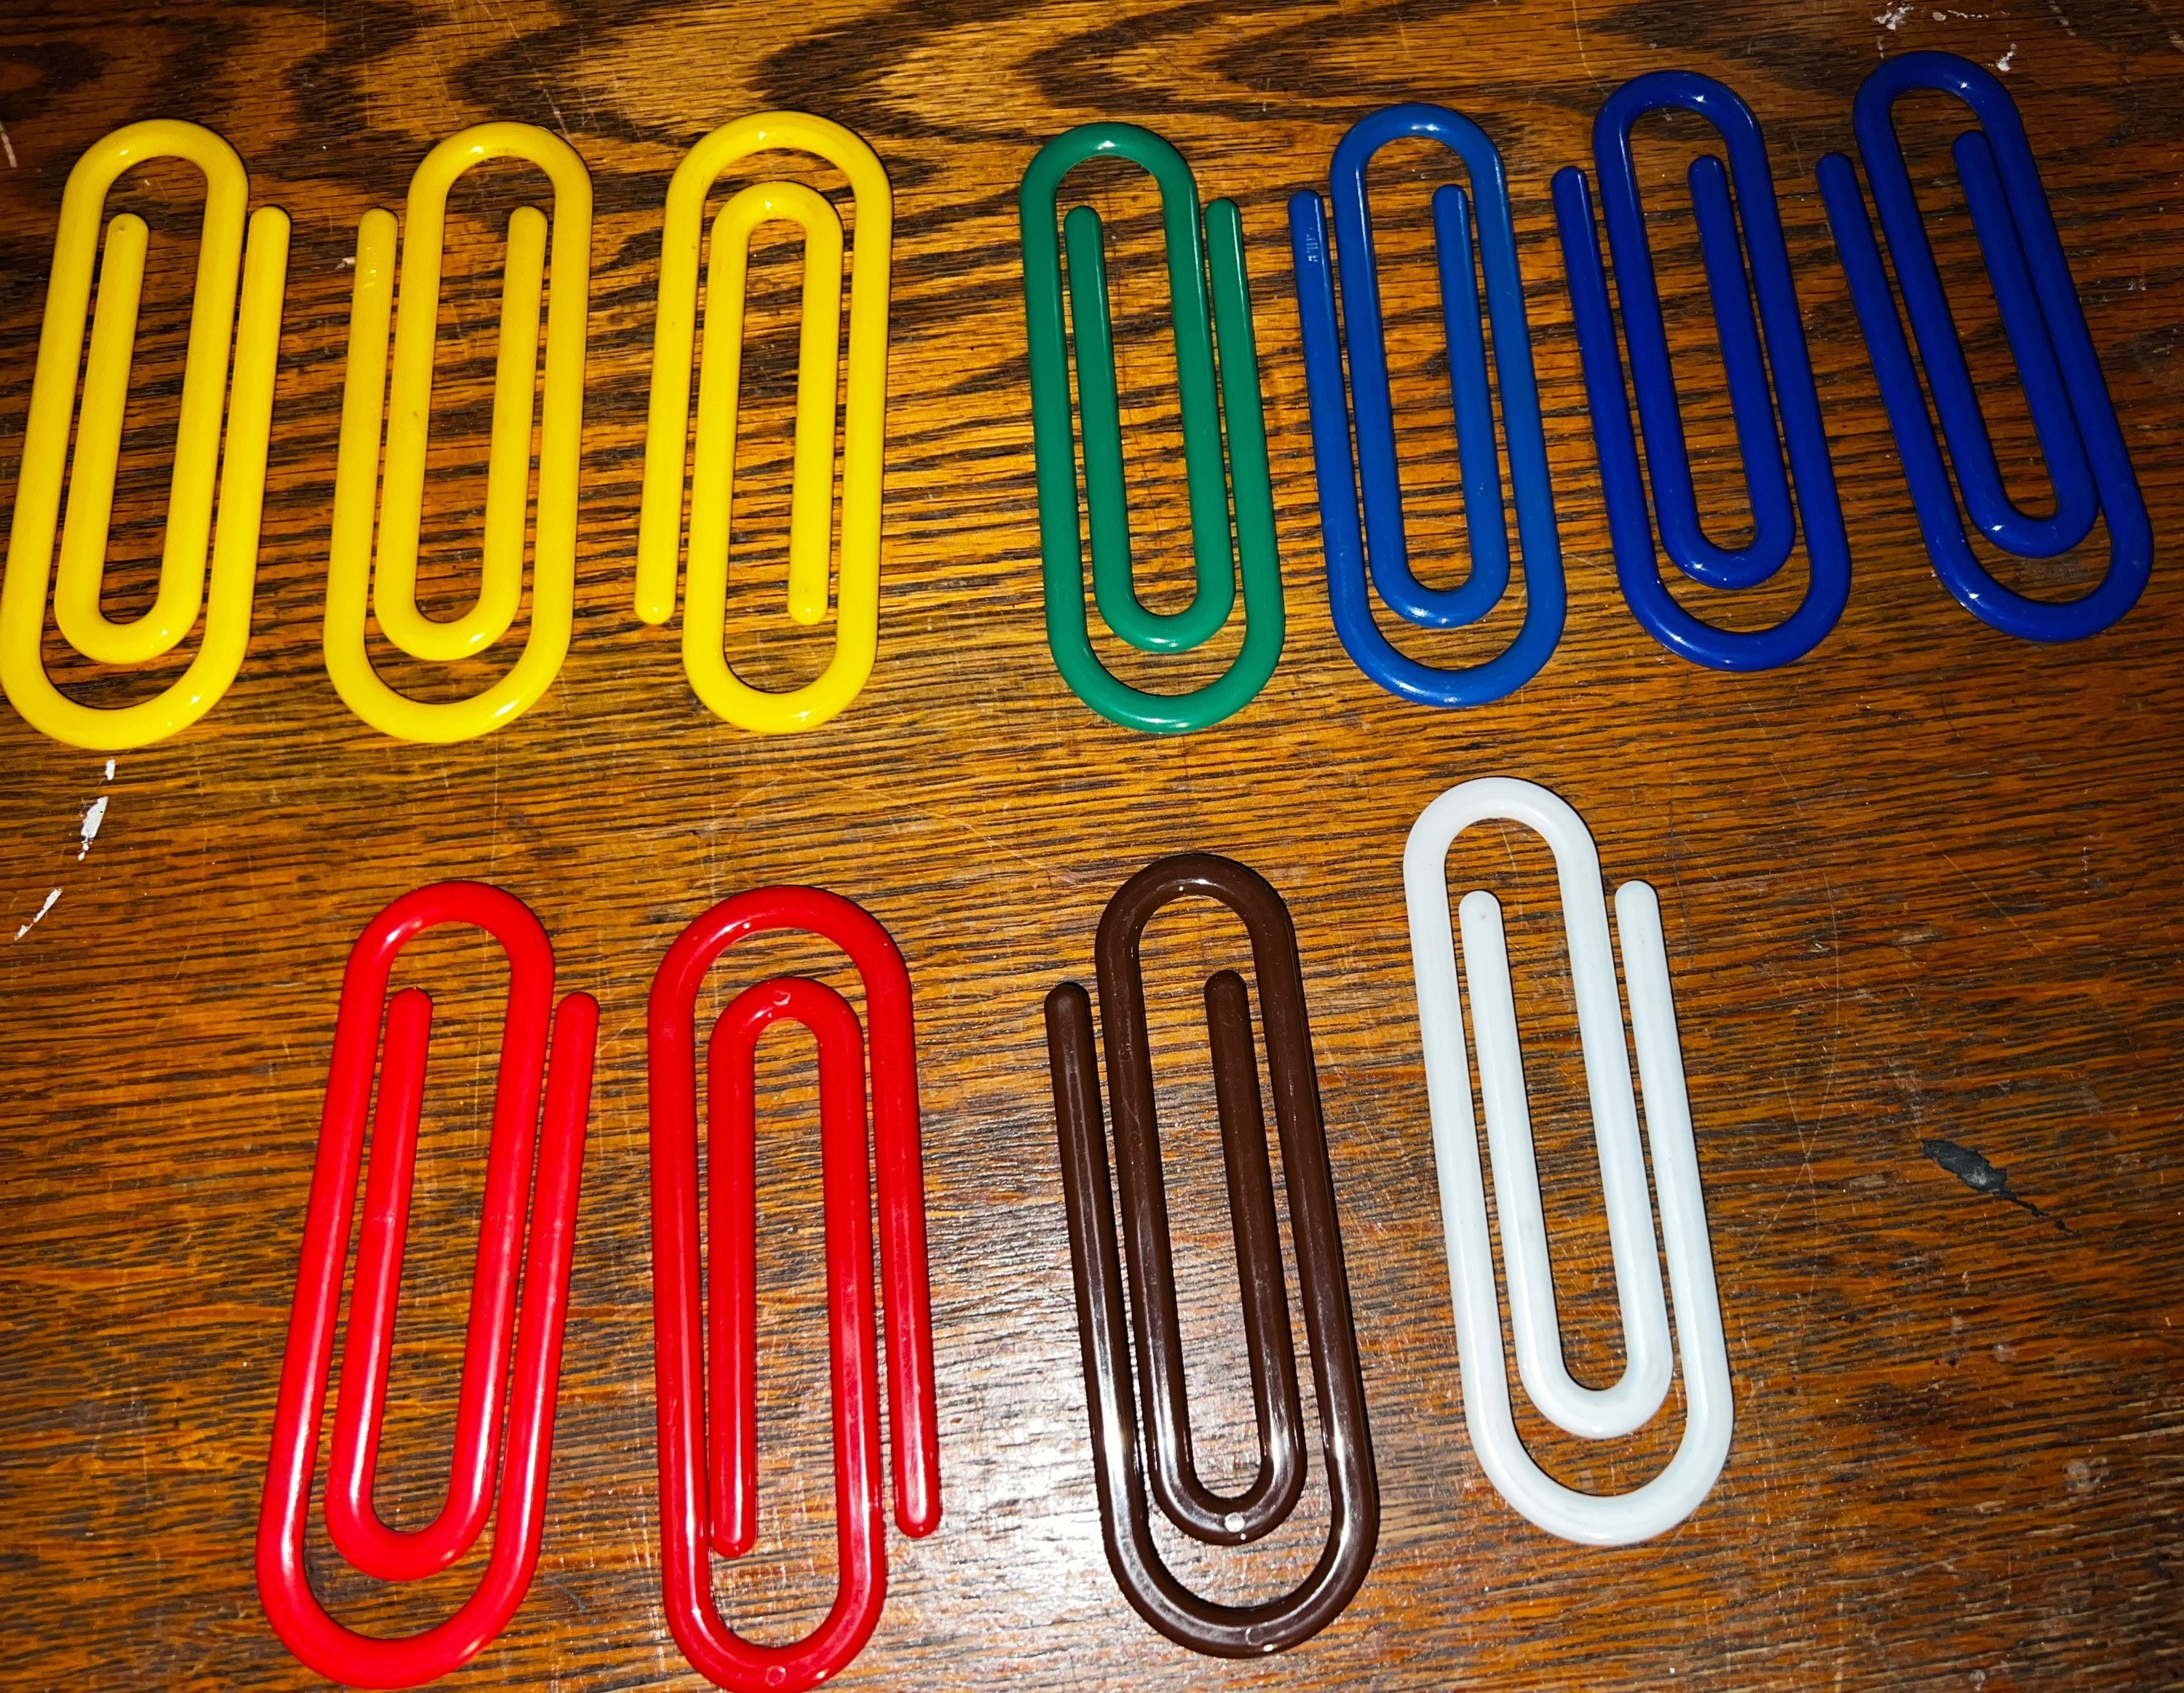 Vintage 80's Large Plastic Paper Clips. Iconic Primary Colors